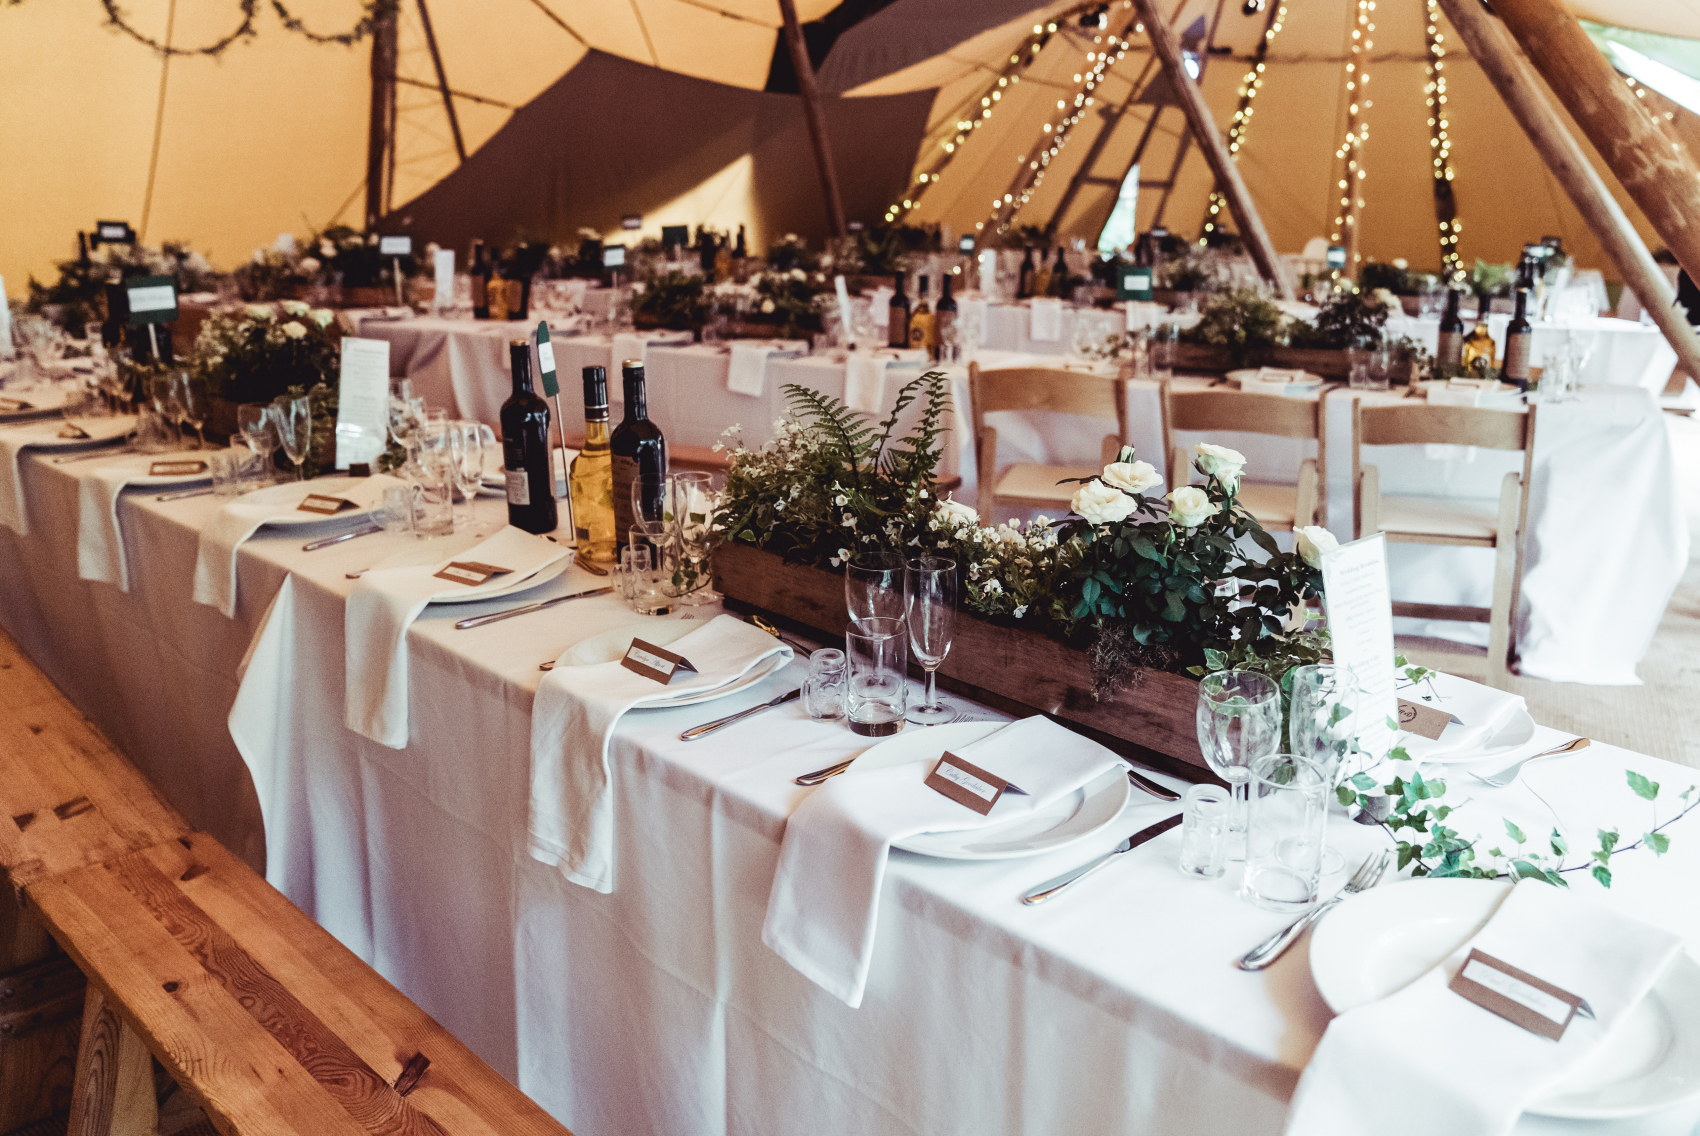 Wedding Staging And Styling Service by Sarah Maidment Interiors, Berkhamsted, Hertfordshire